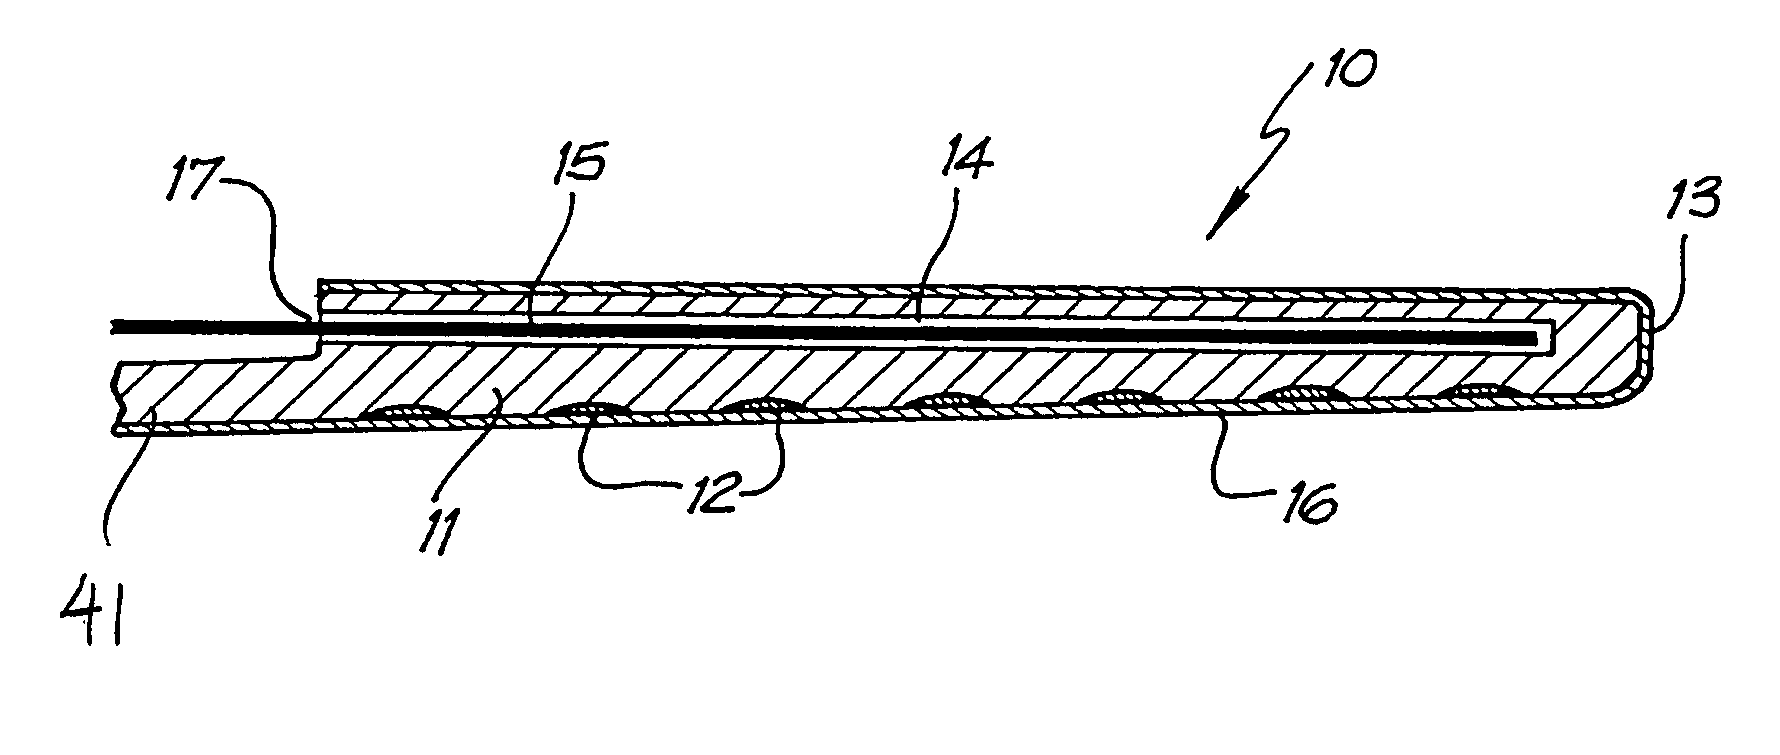 Connector for drug delivery system in cochlear implant